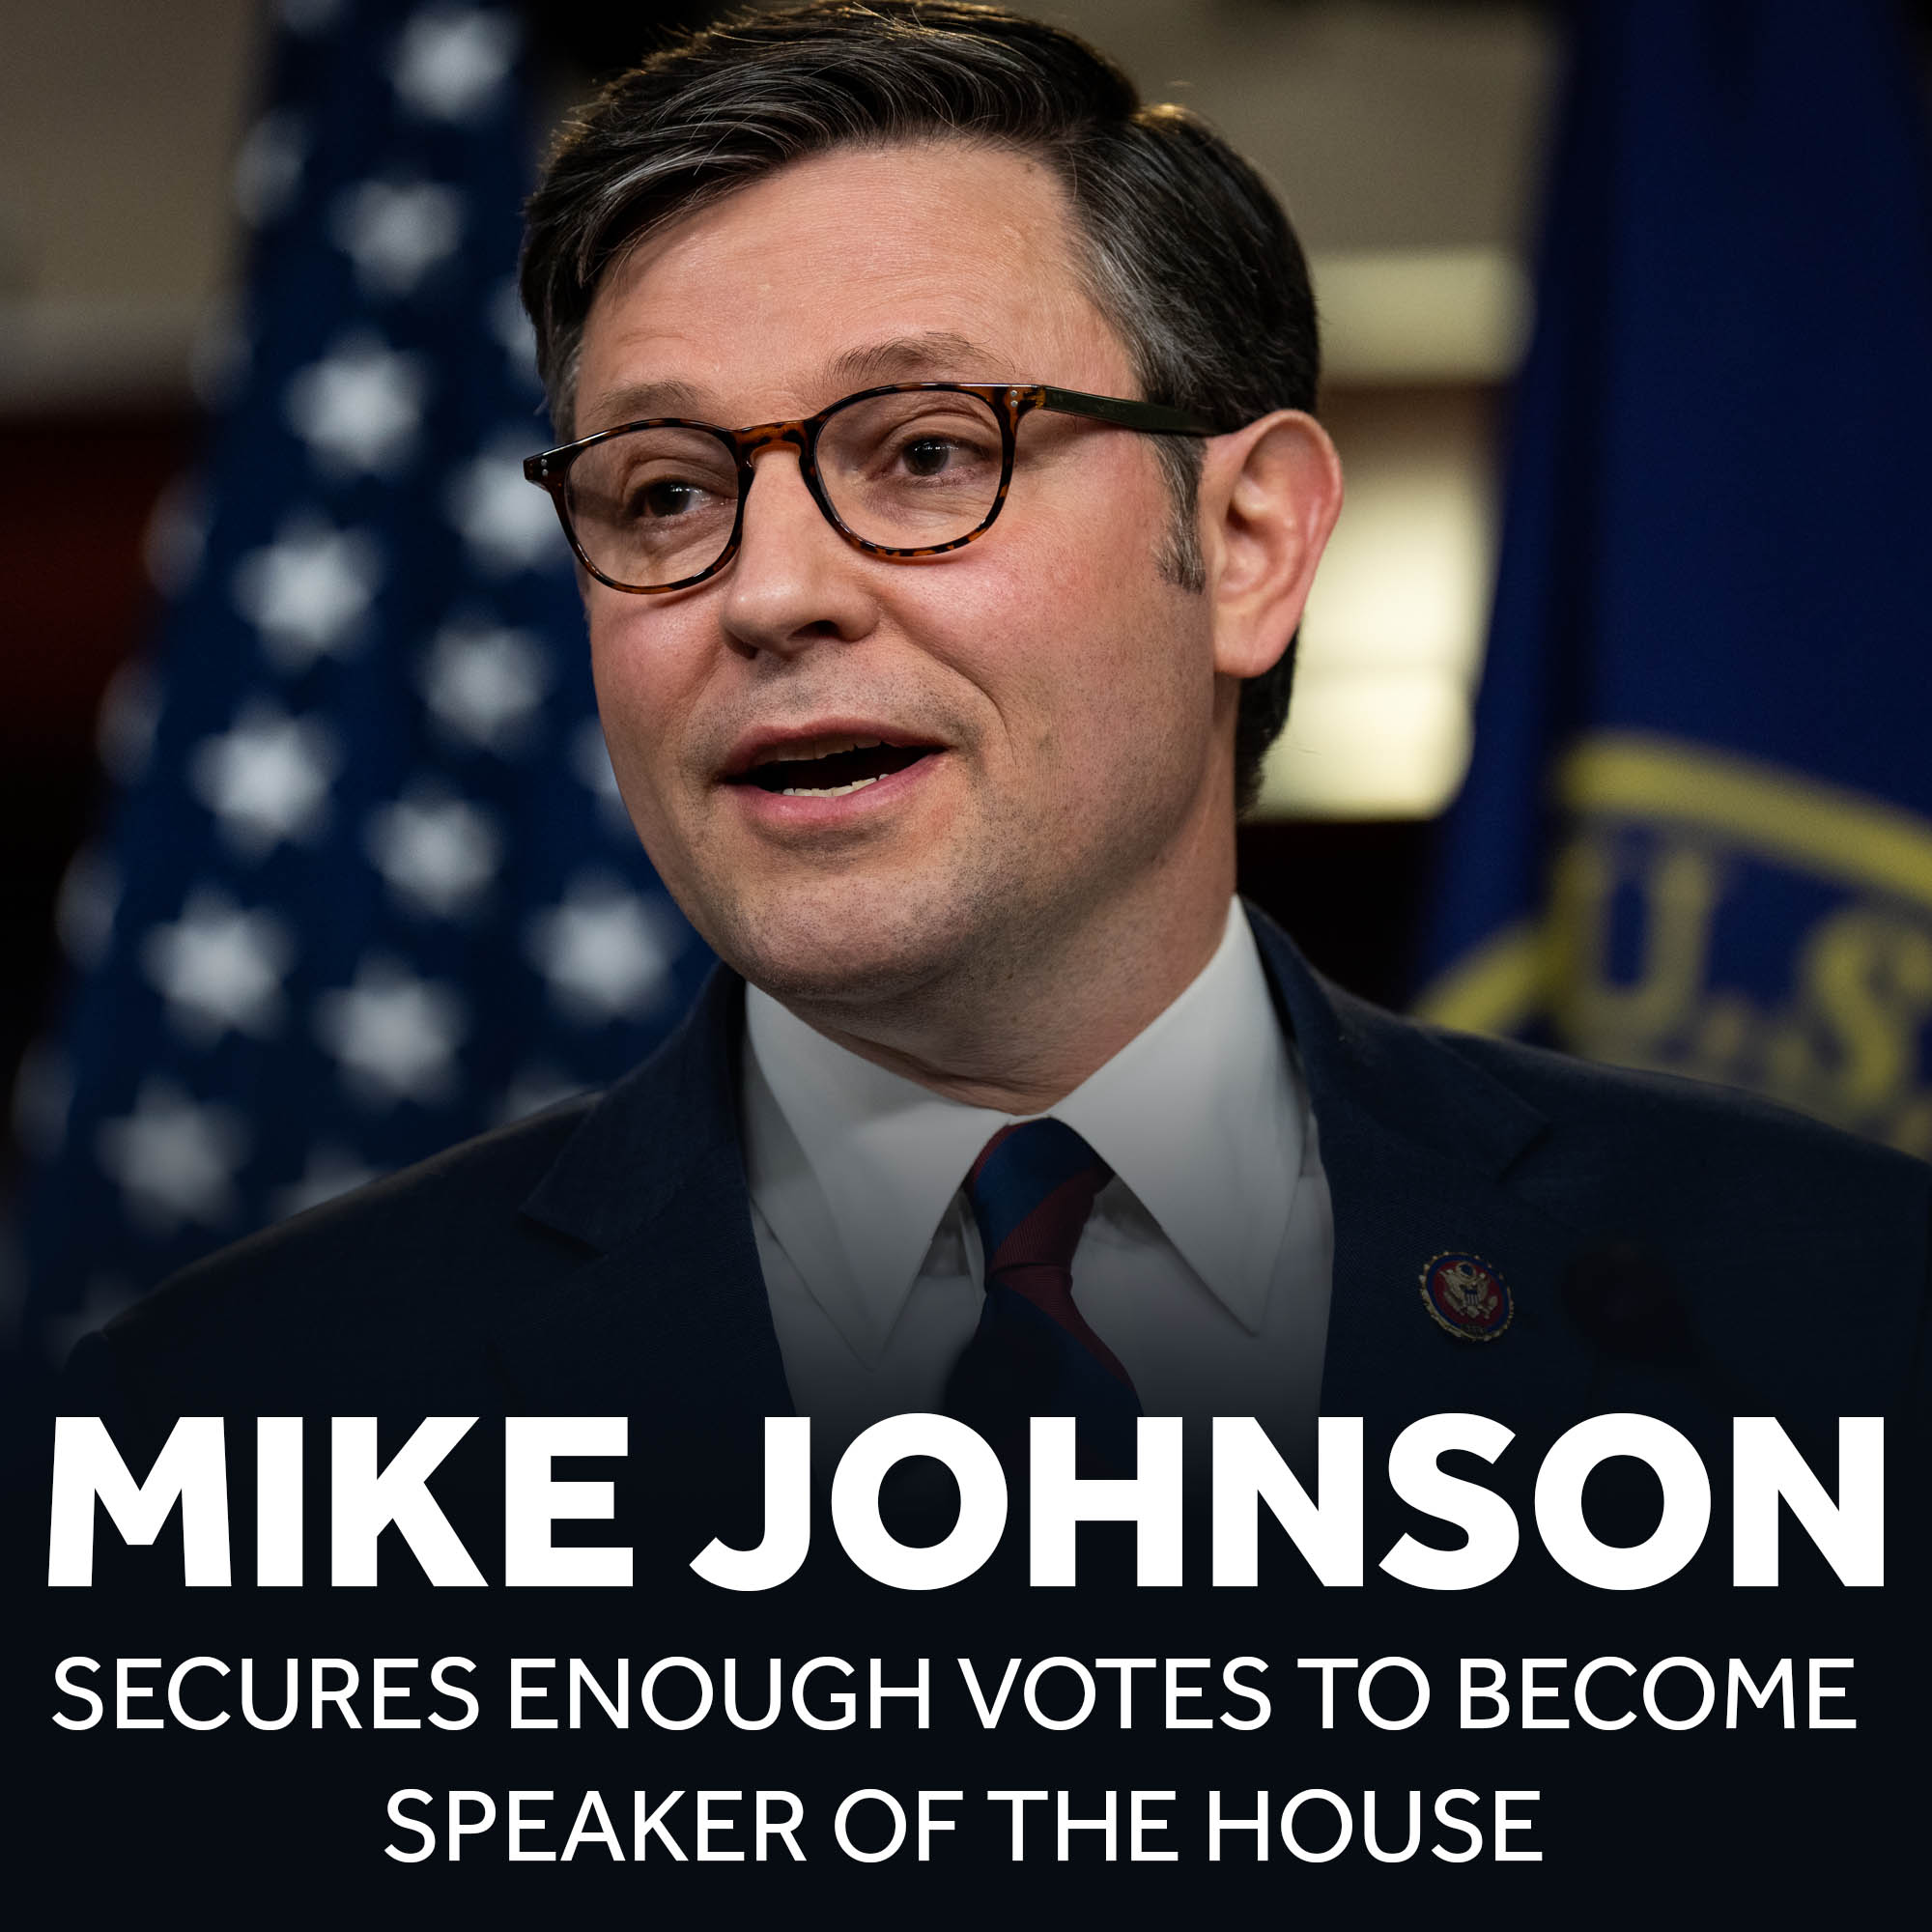 How do you become Speaker of the House?